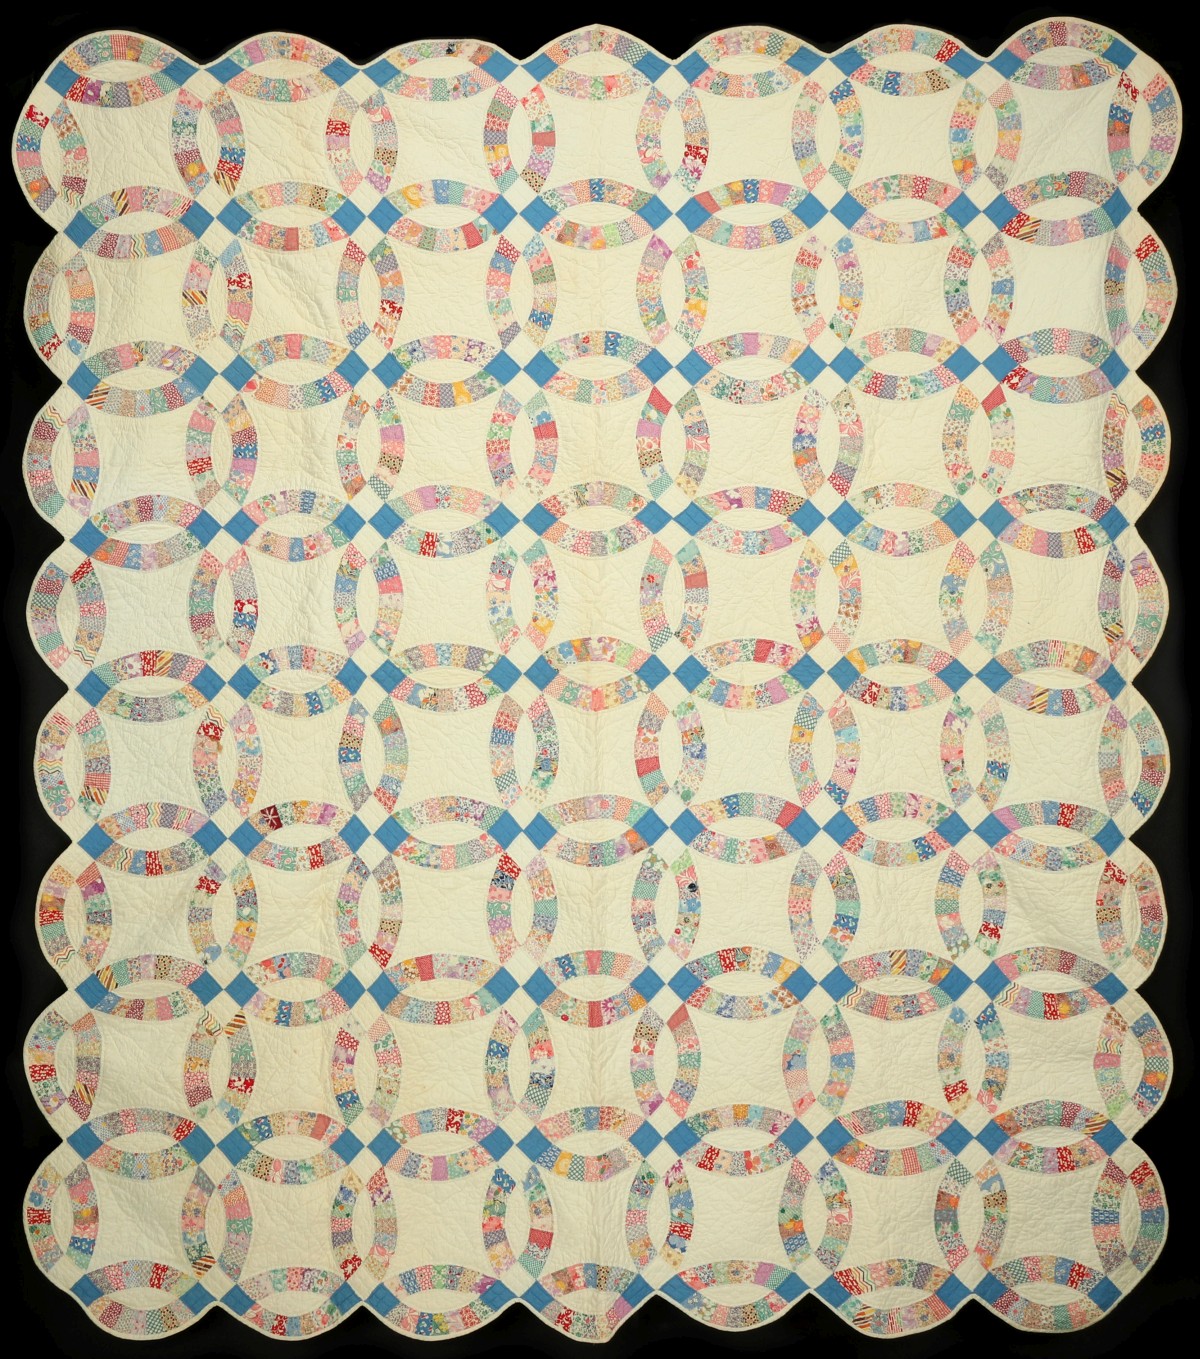 A 1930s 'DOUBLE WEDDING RING' PATTERN QUILT